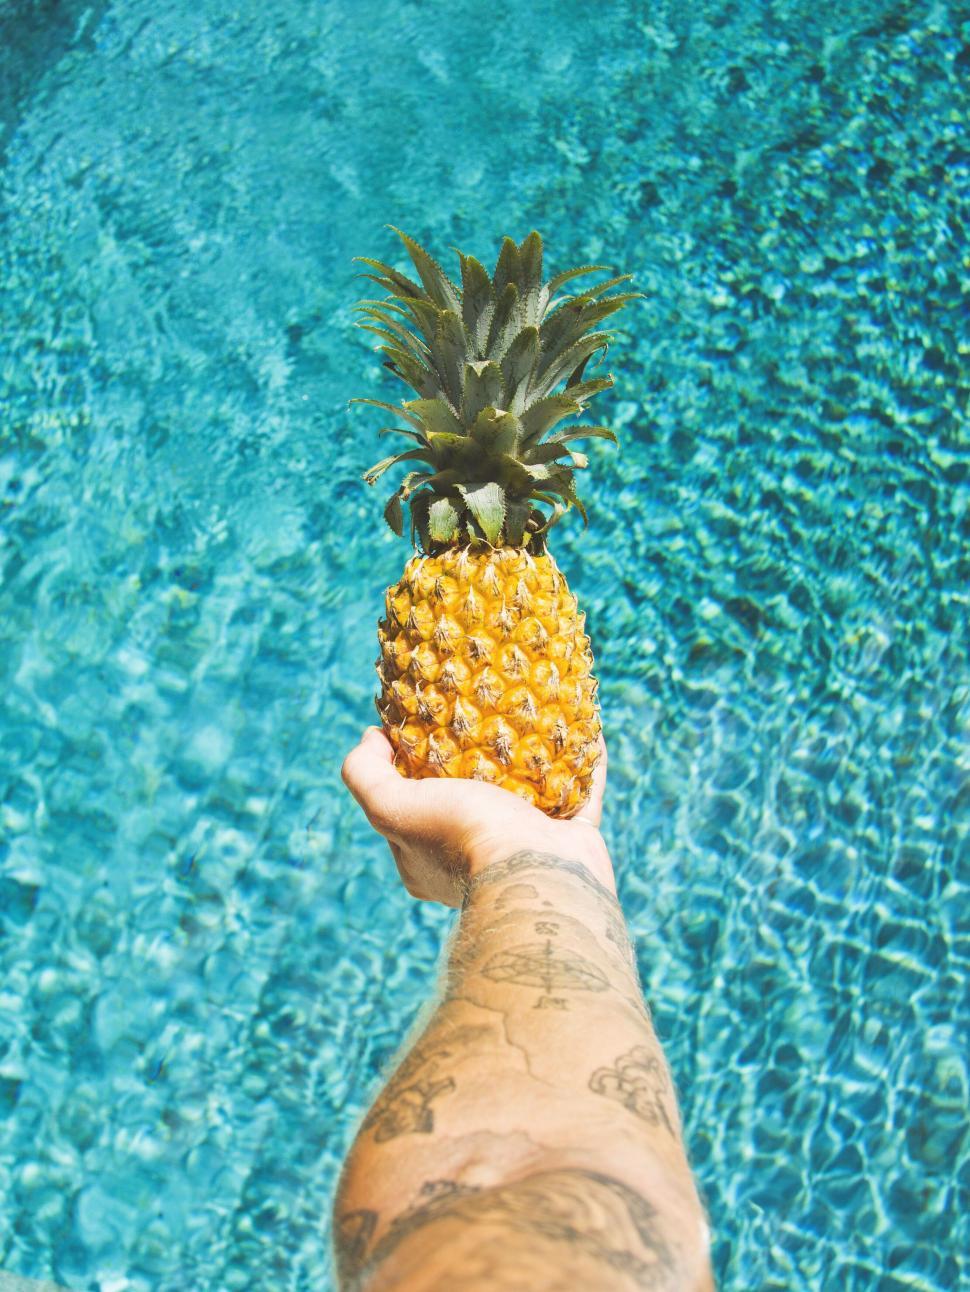 Free Image of Tattooed arm reaching with pineapple 